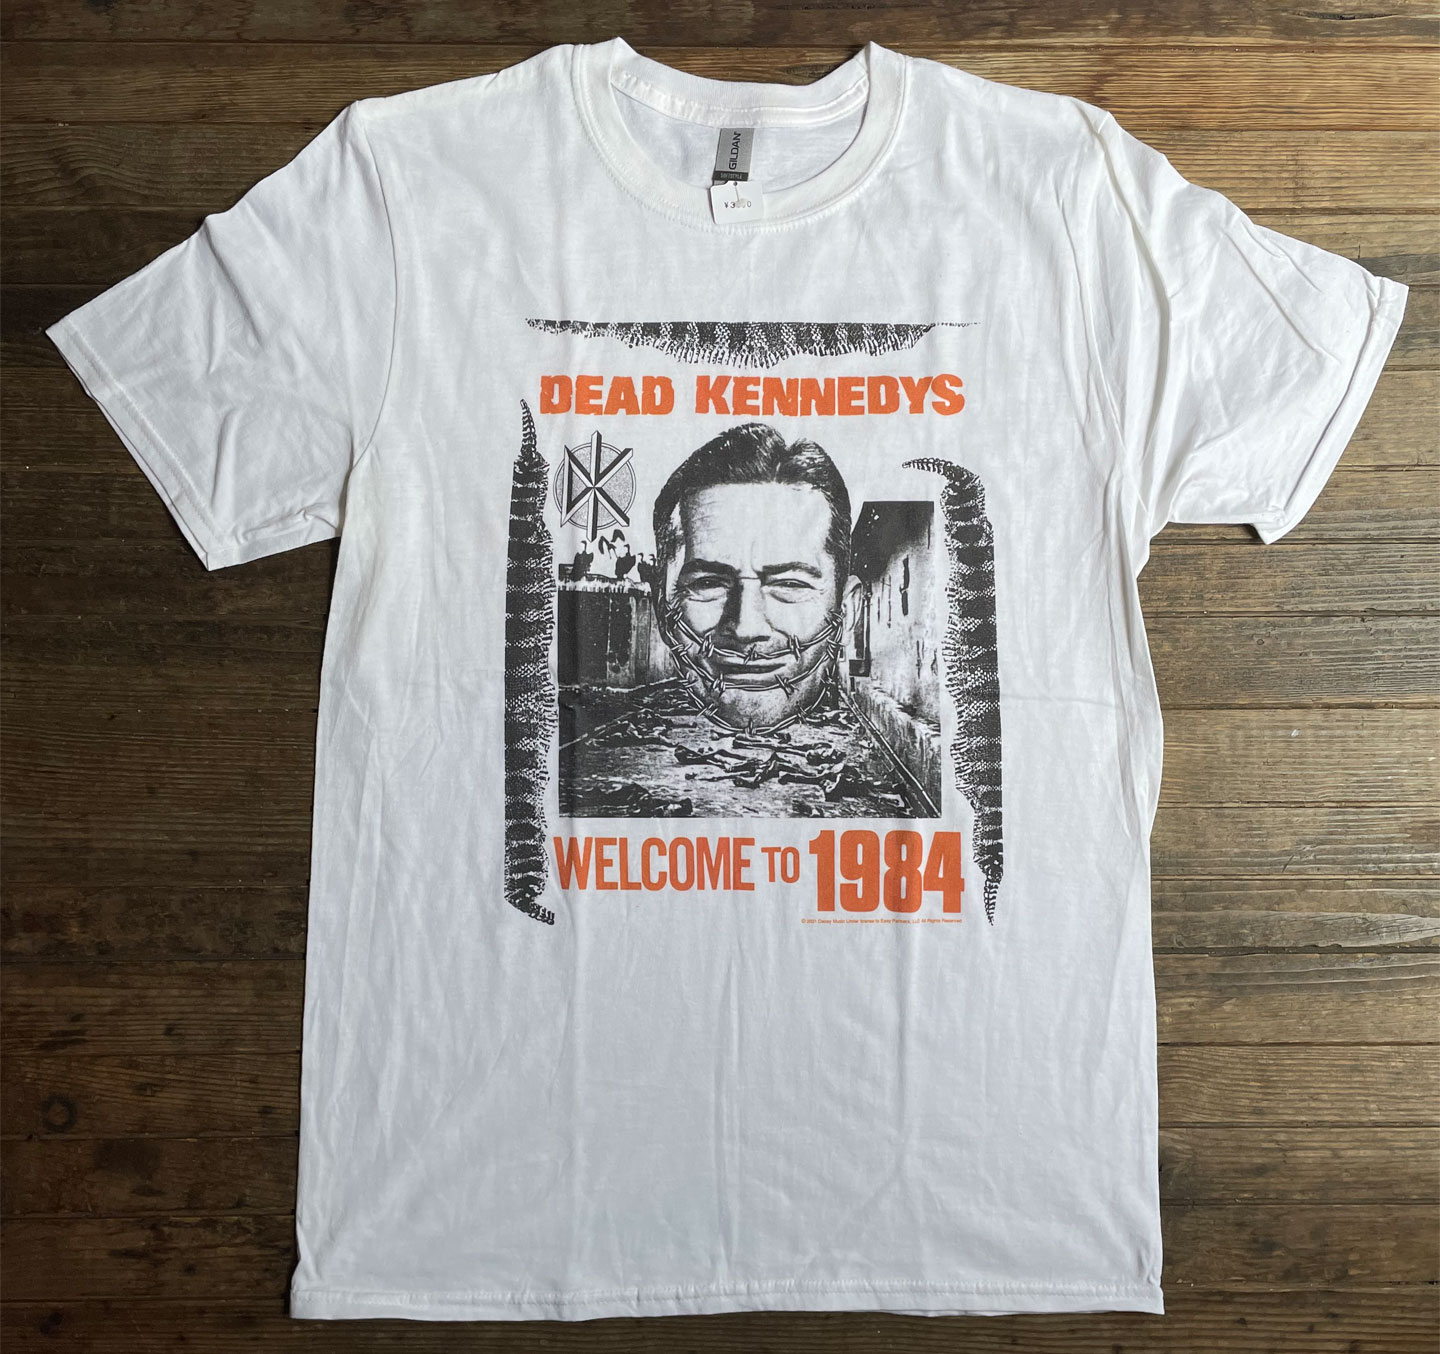 DEAD KENNEDYS Tシャツ WELCOME TO 1984 オフィシャル